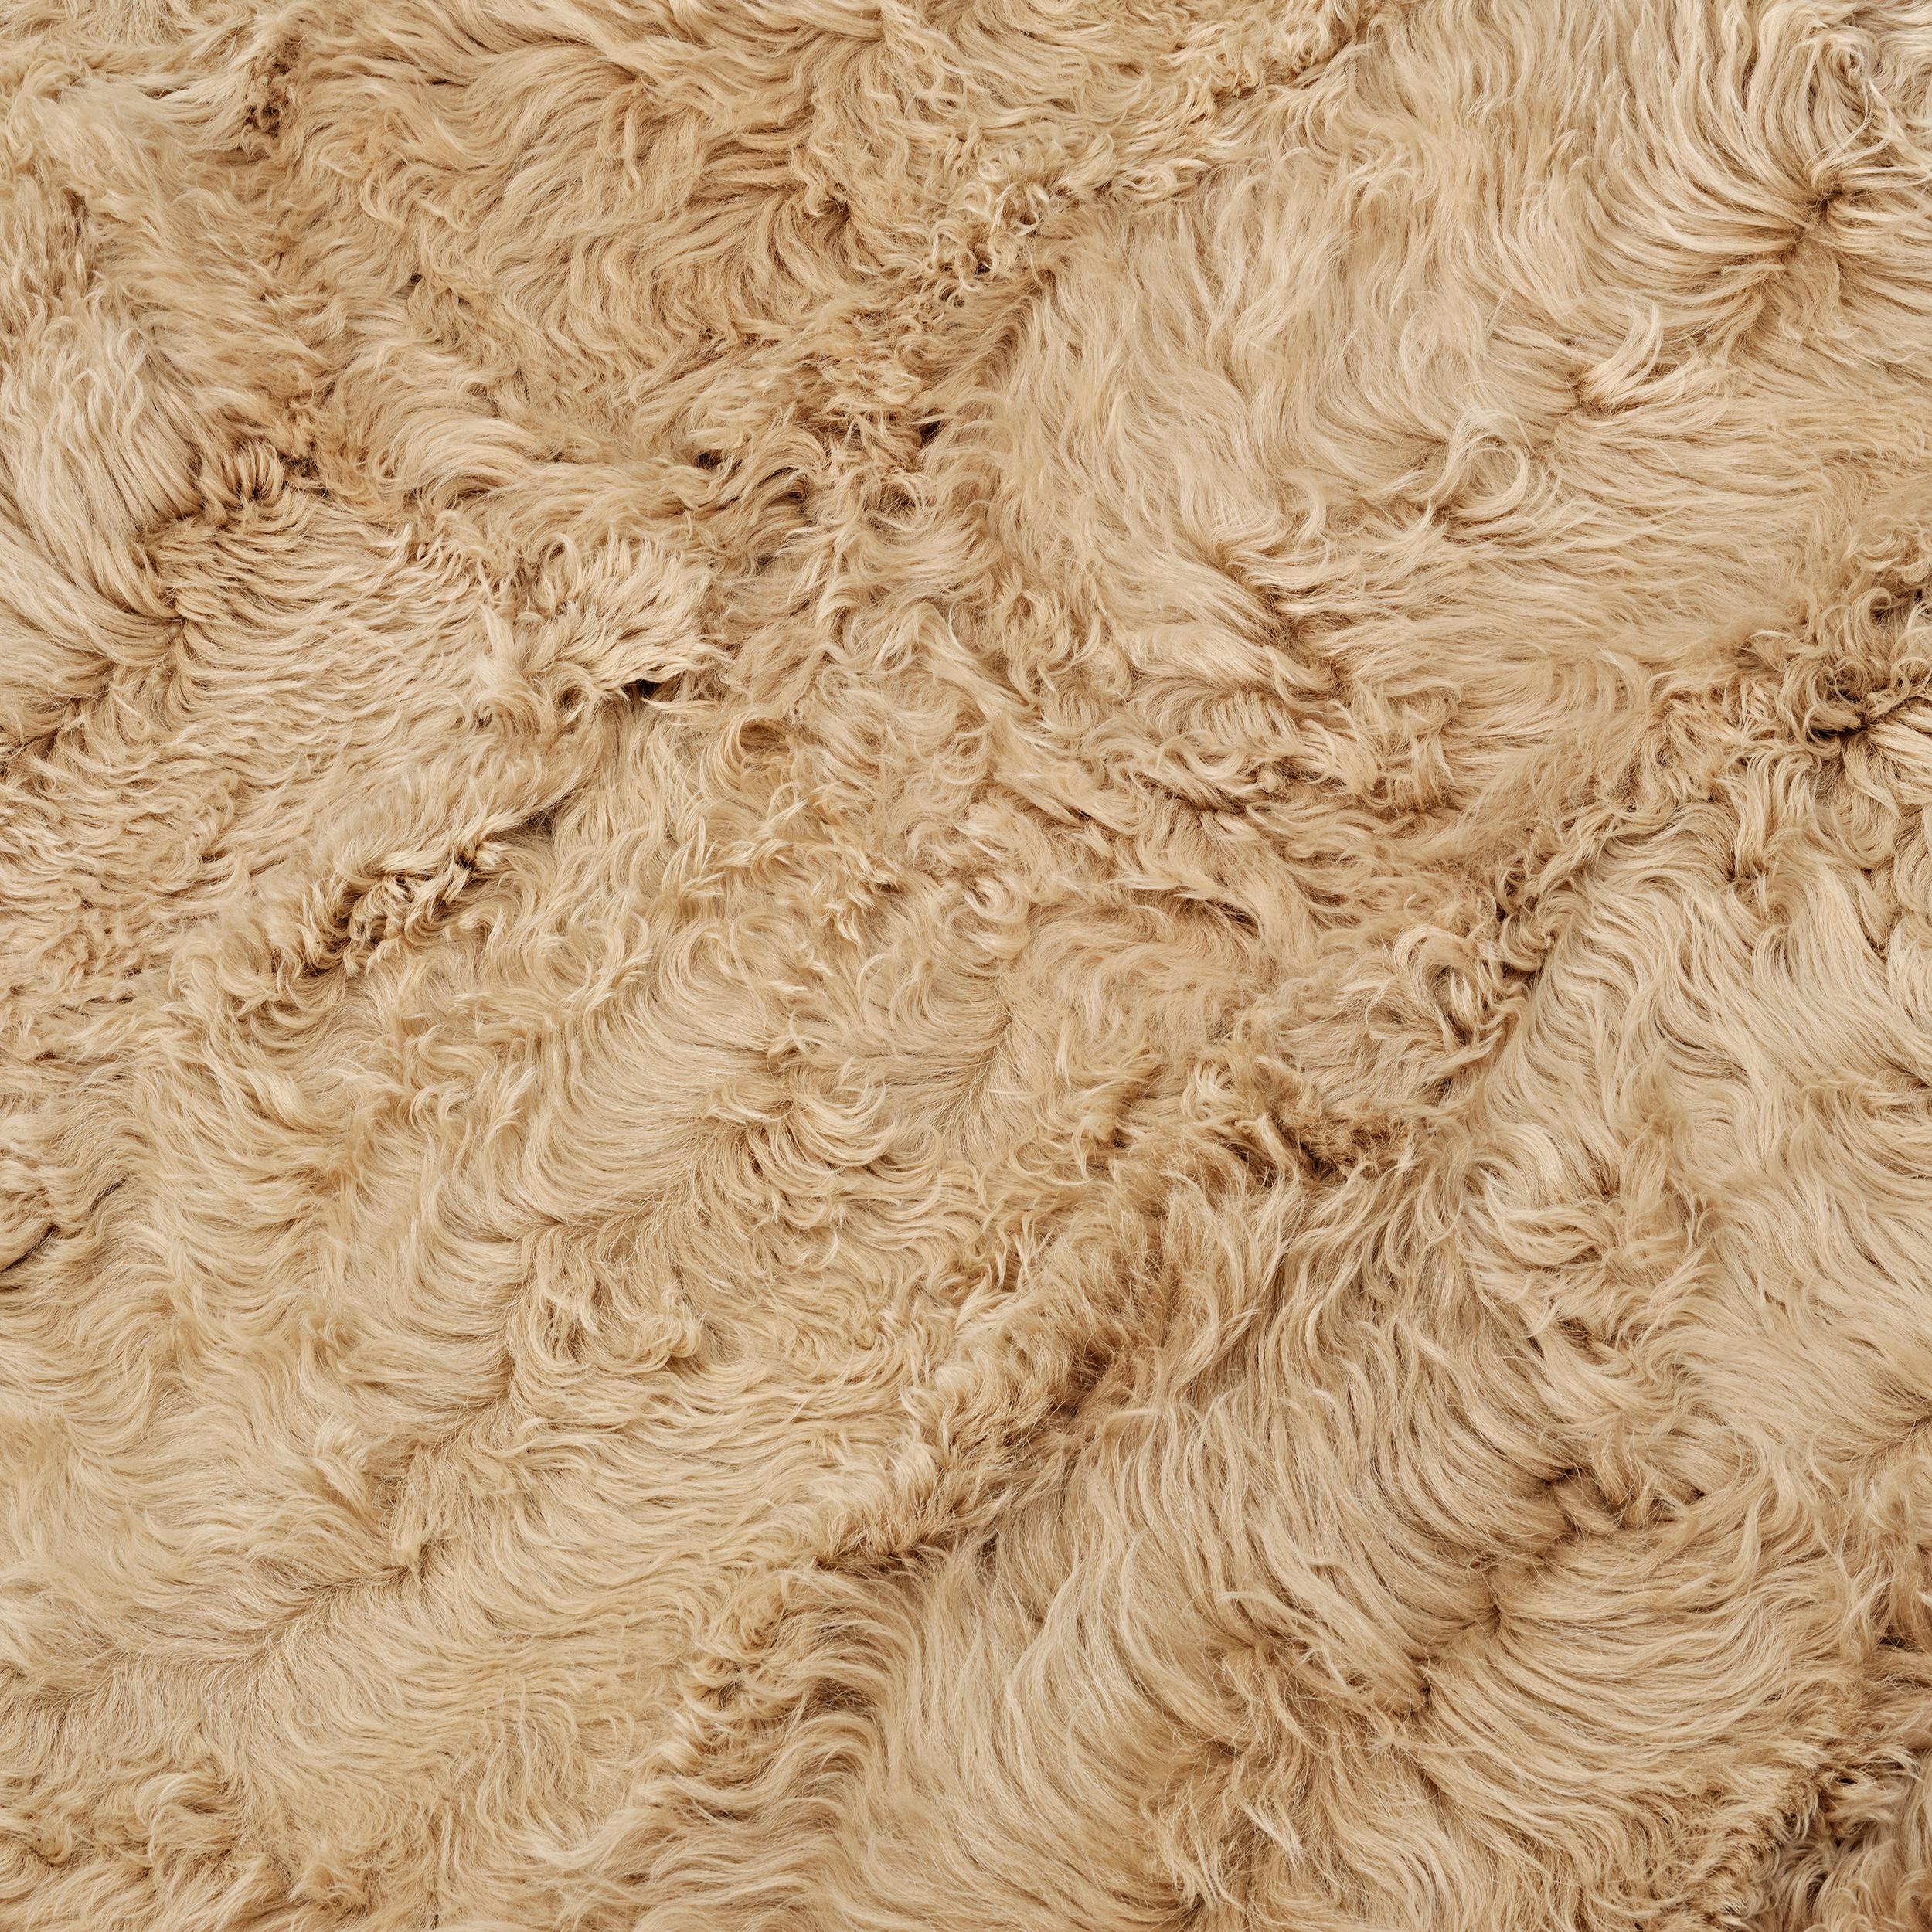 Double-Faced Sheepskin Long Curly Fur Throw Blanket For Sale 2